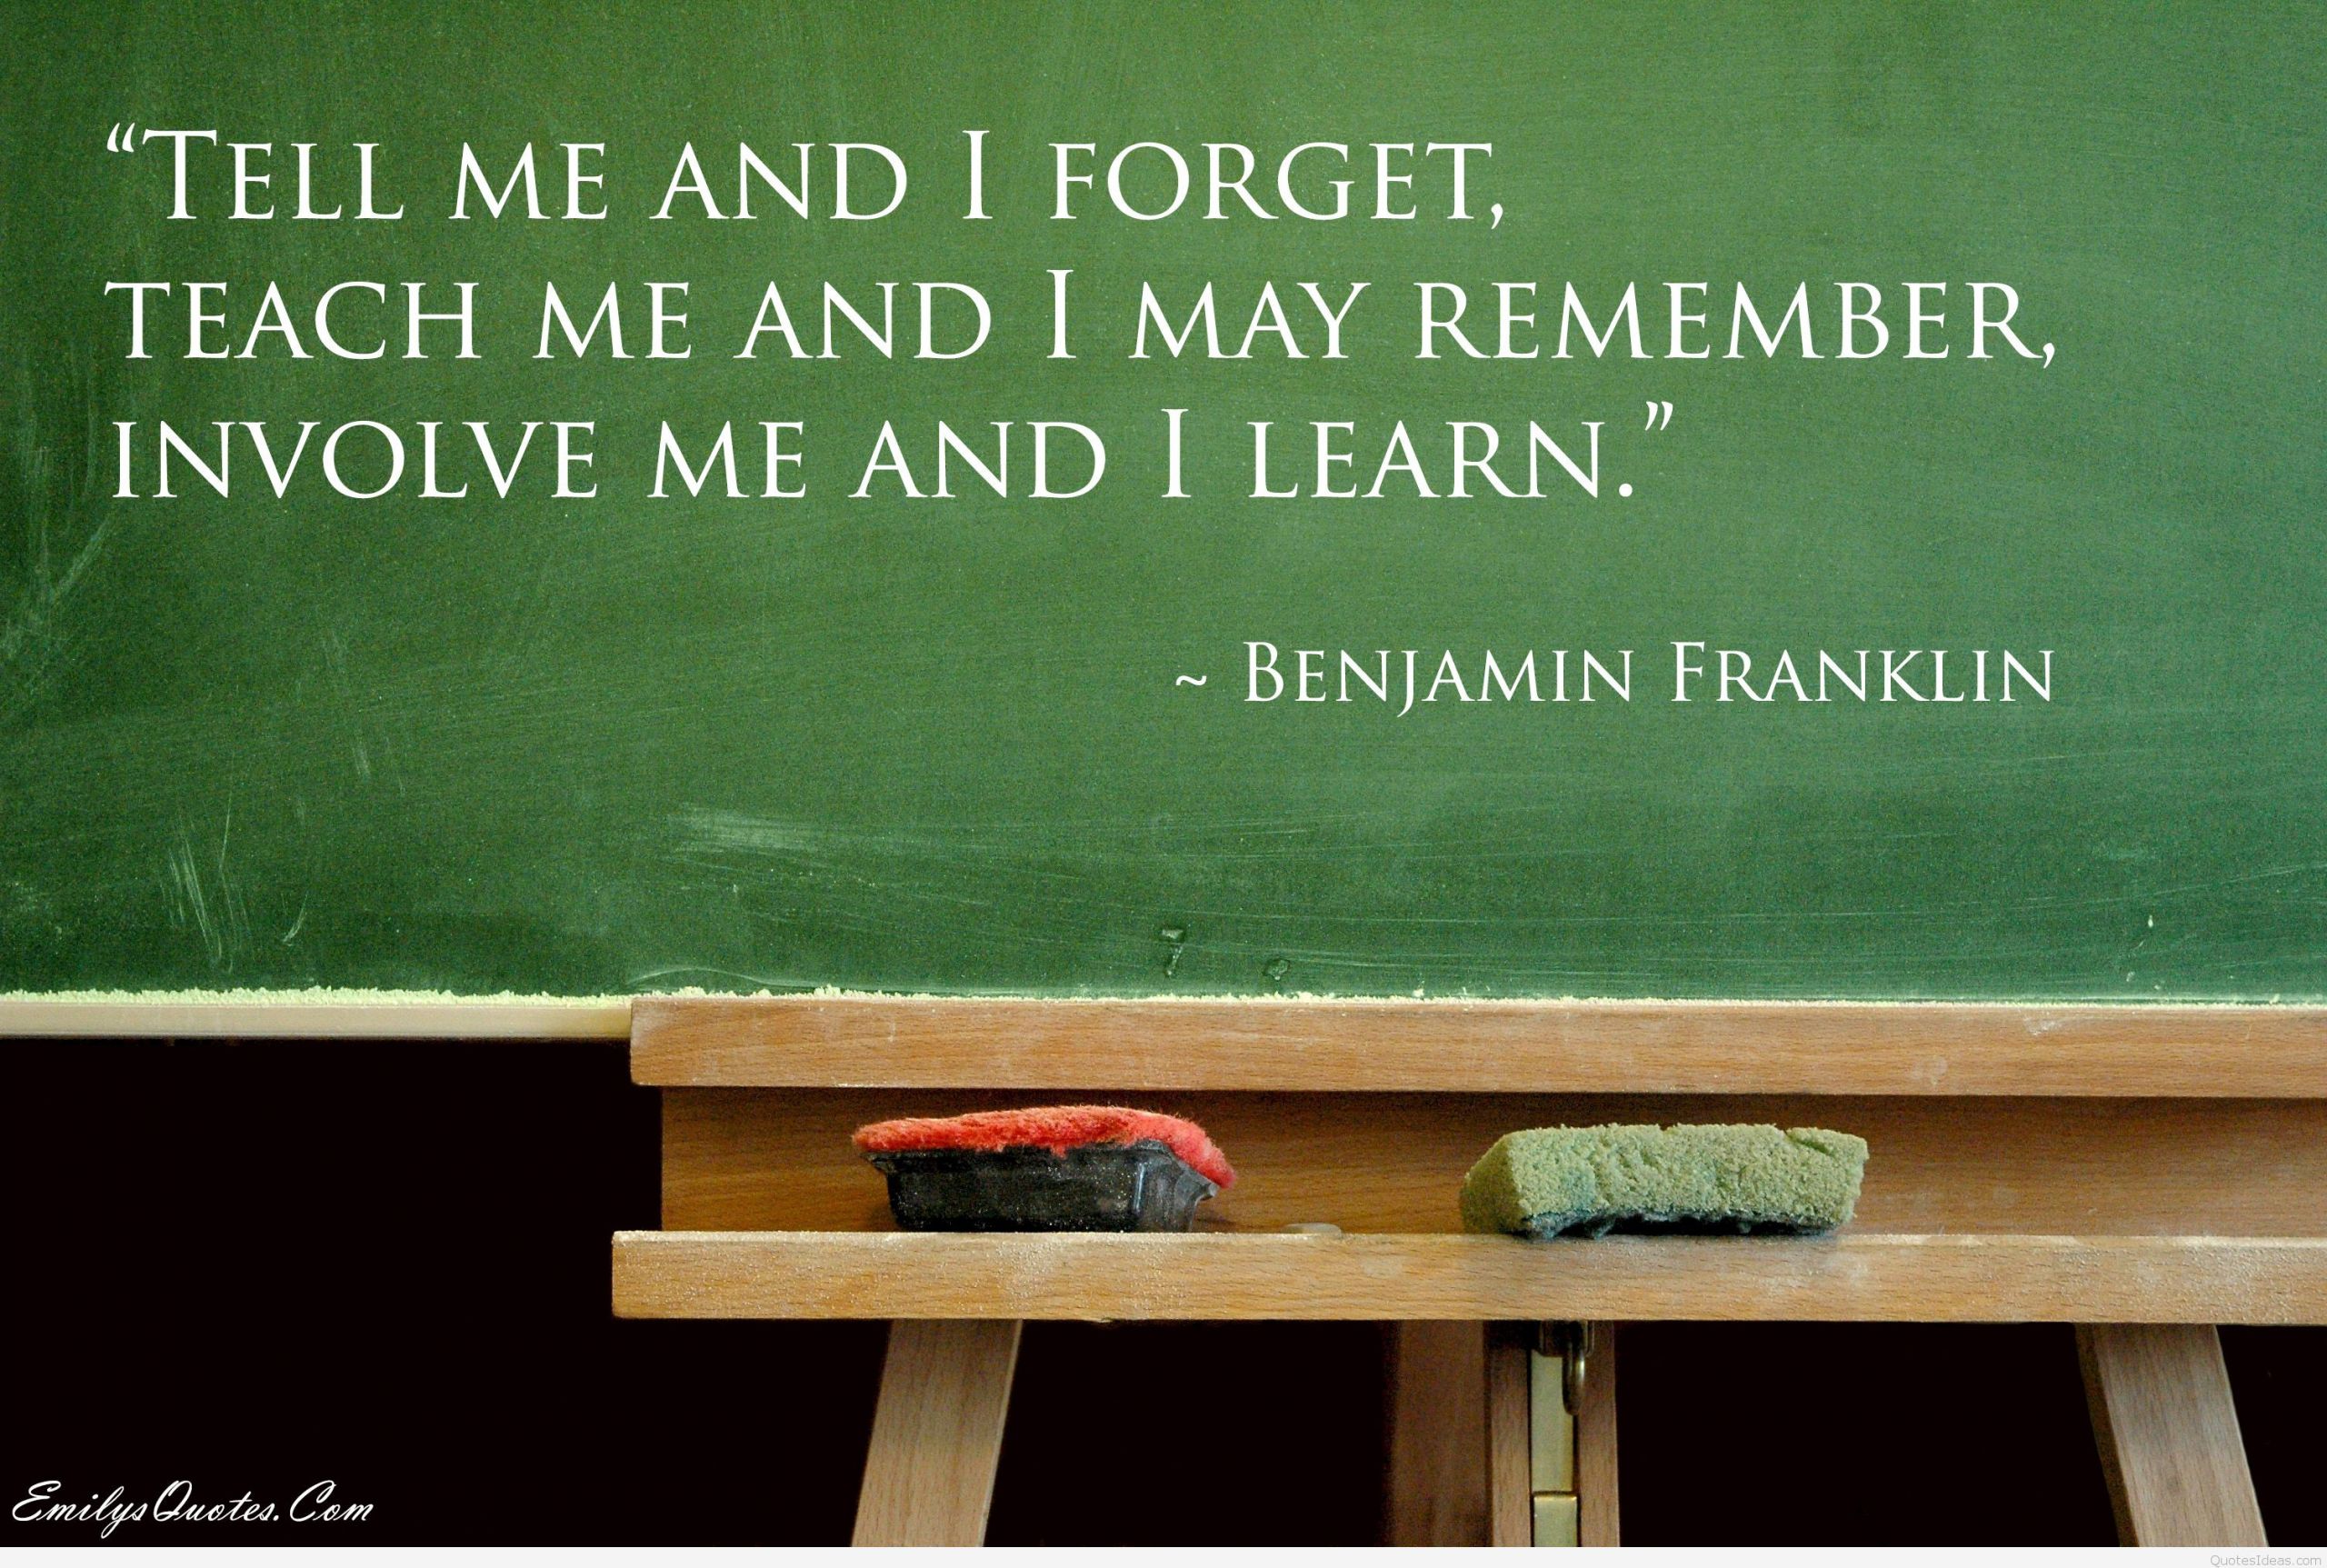 Benjamin Franklin Quotes On Education
 Awesome learning quote hd wallpaper